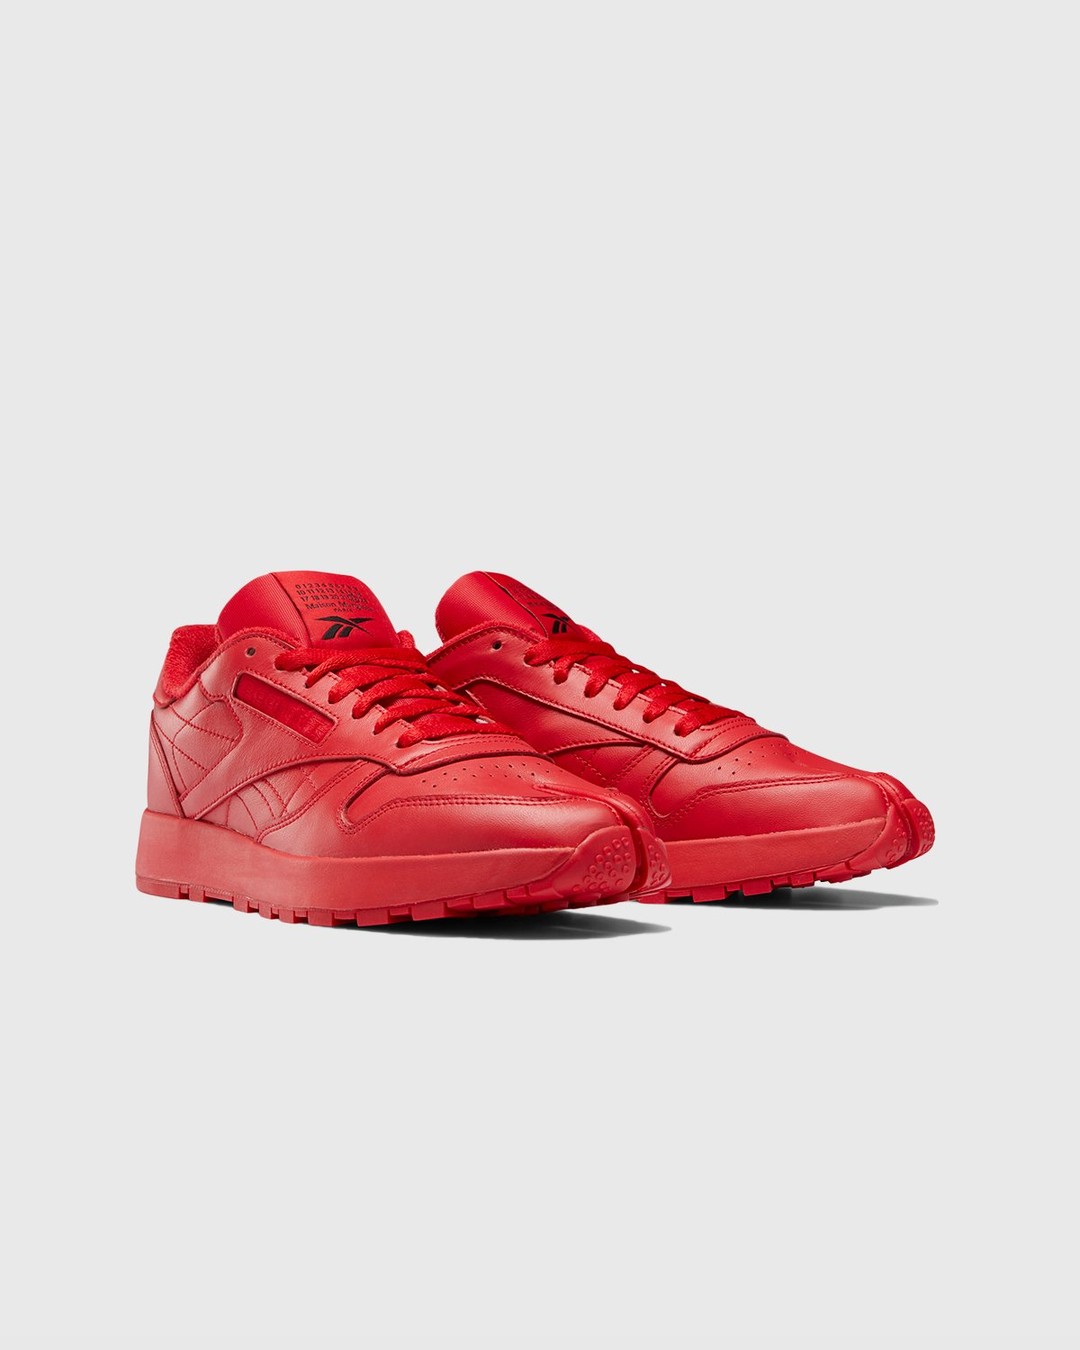 Maison Margiela x Reebok – Classic Leather Tabi Red - Low Top Sneakers - Red - Image 2